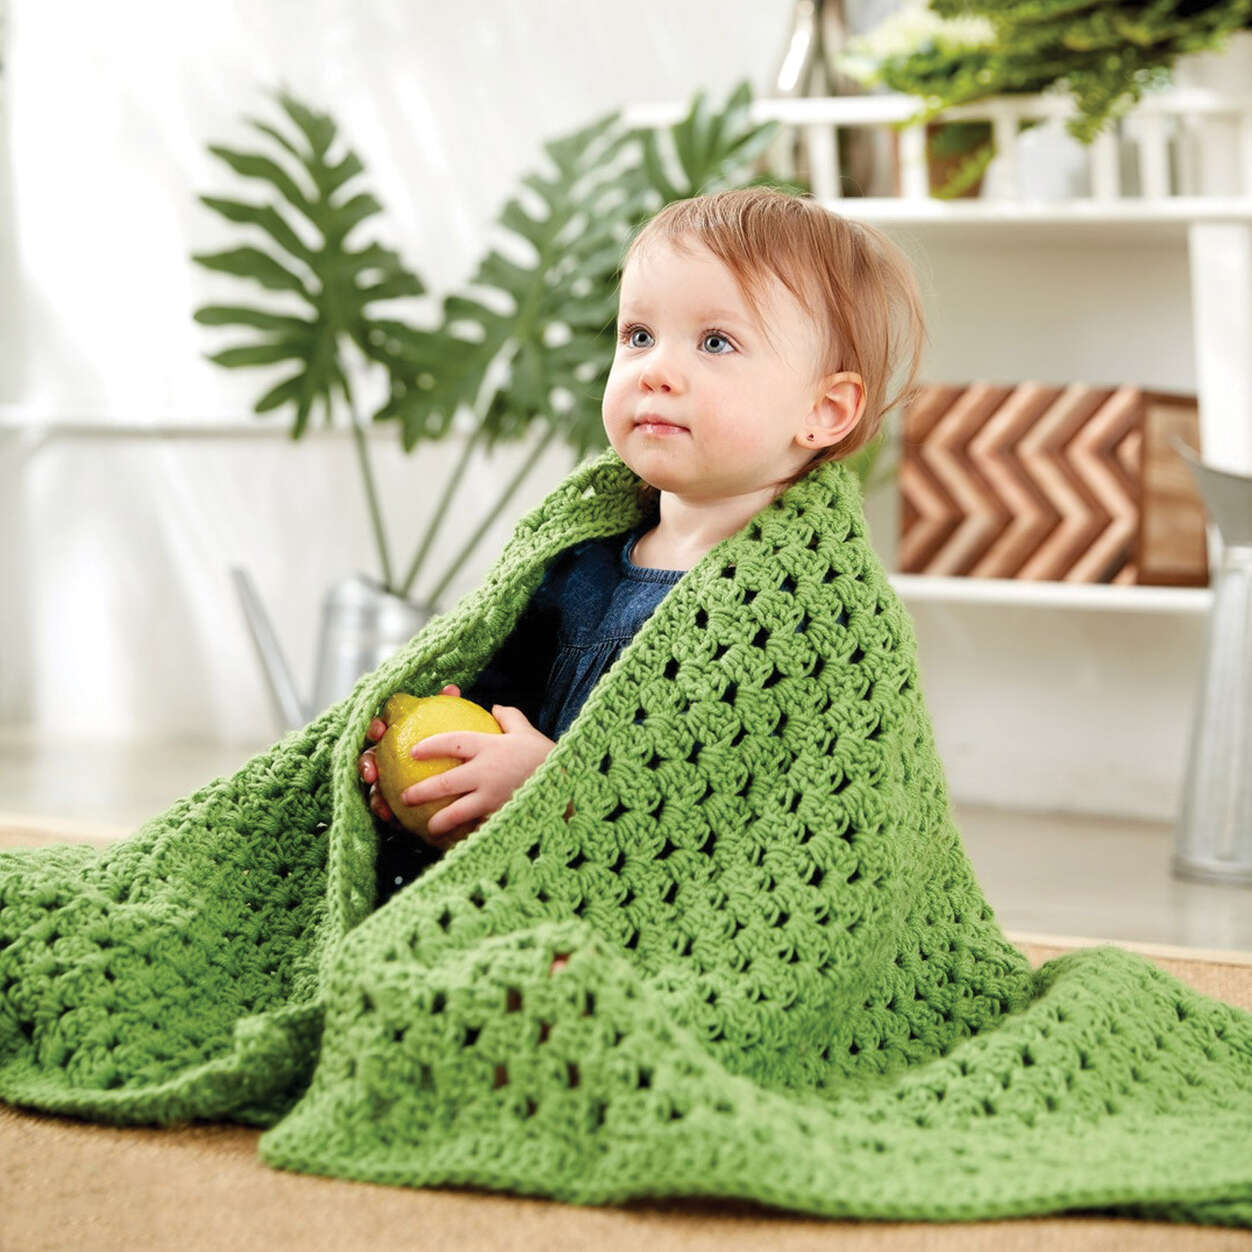 What Are The Best Knit and Crochet Blanket Sizes for All Ages?